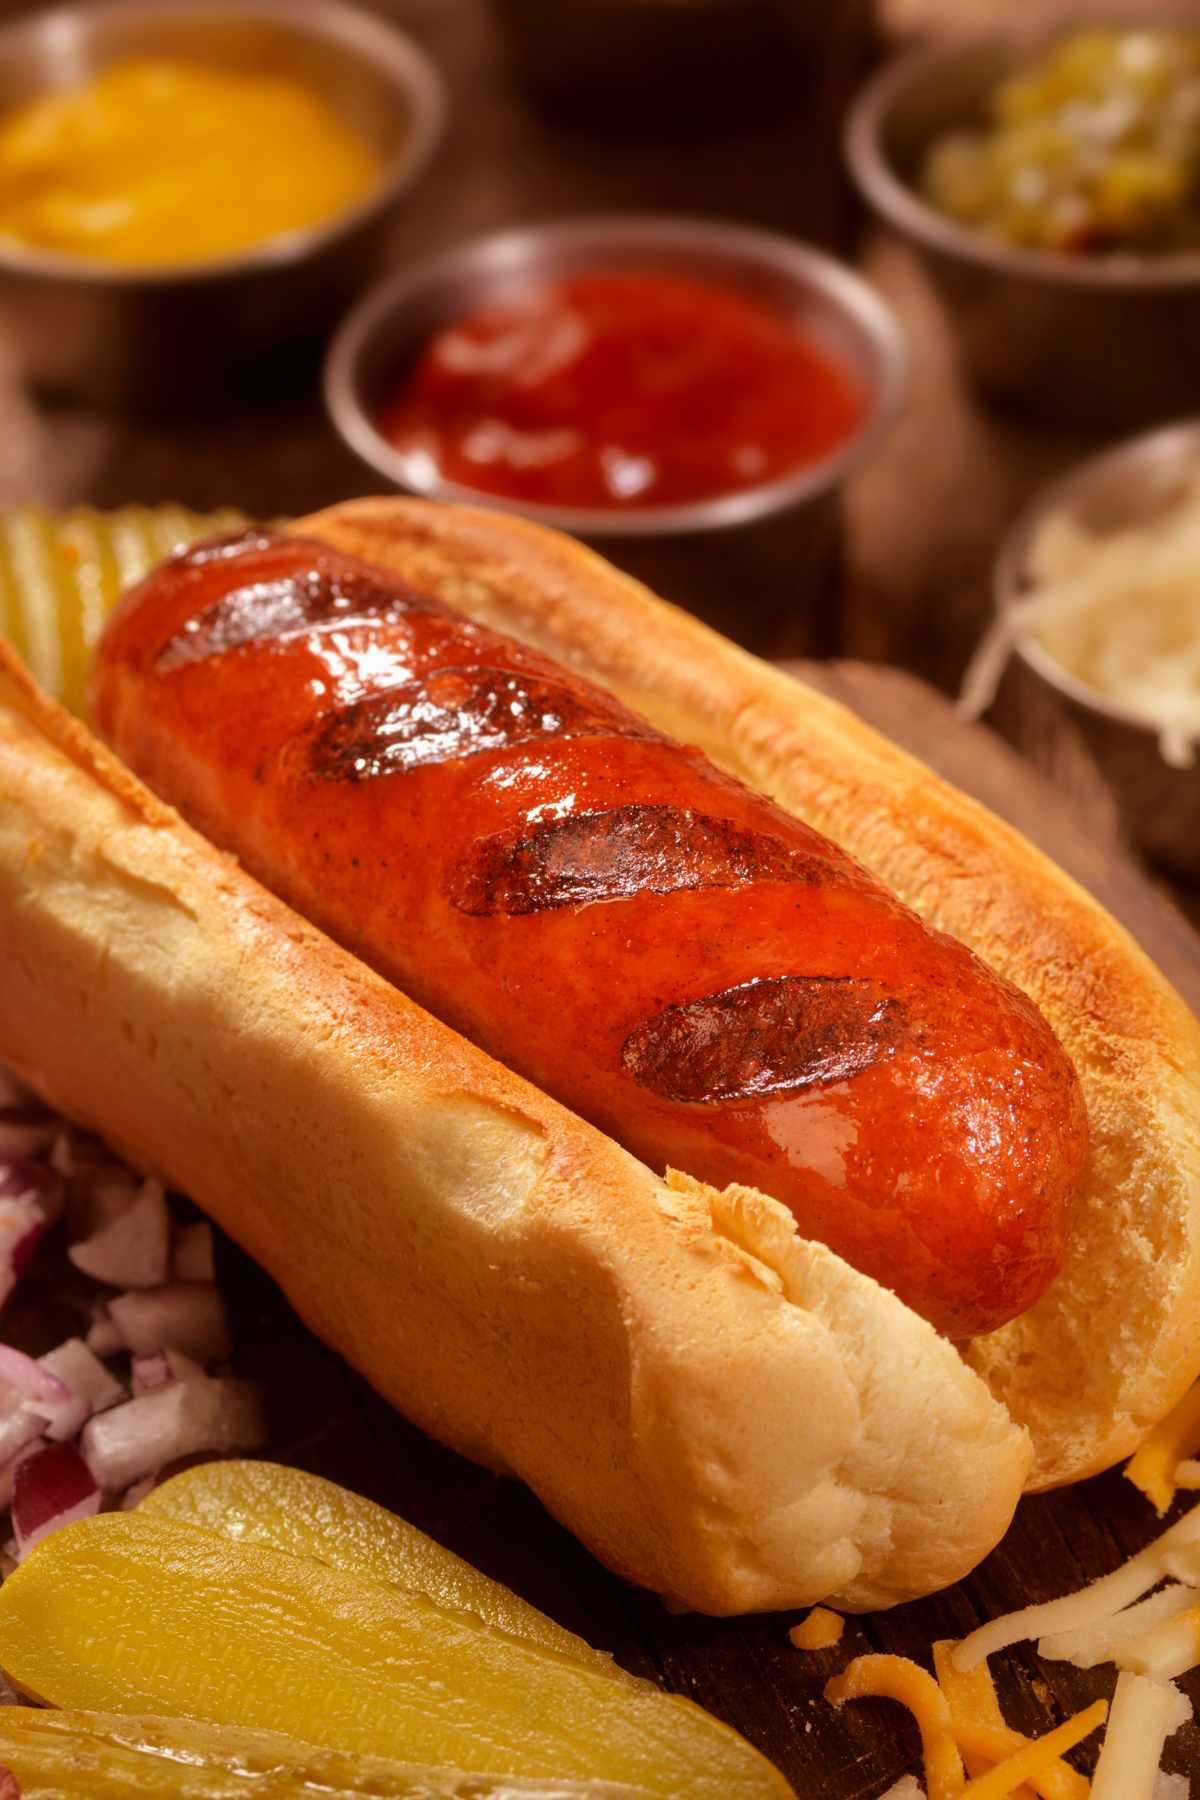 Everyone loves hot dogs. They’re a quick and easy meal for lunches, dinners and parties. However, if you are on a ketogenic diet, you may wonder, are hot dogs keto-friendly? In this post, we will explore the carb content of hot dogs and share with you a keto-friendly hot dog recipe to make at home.